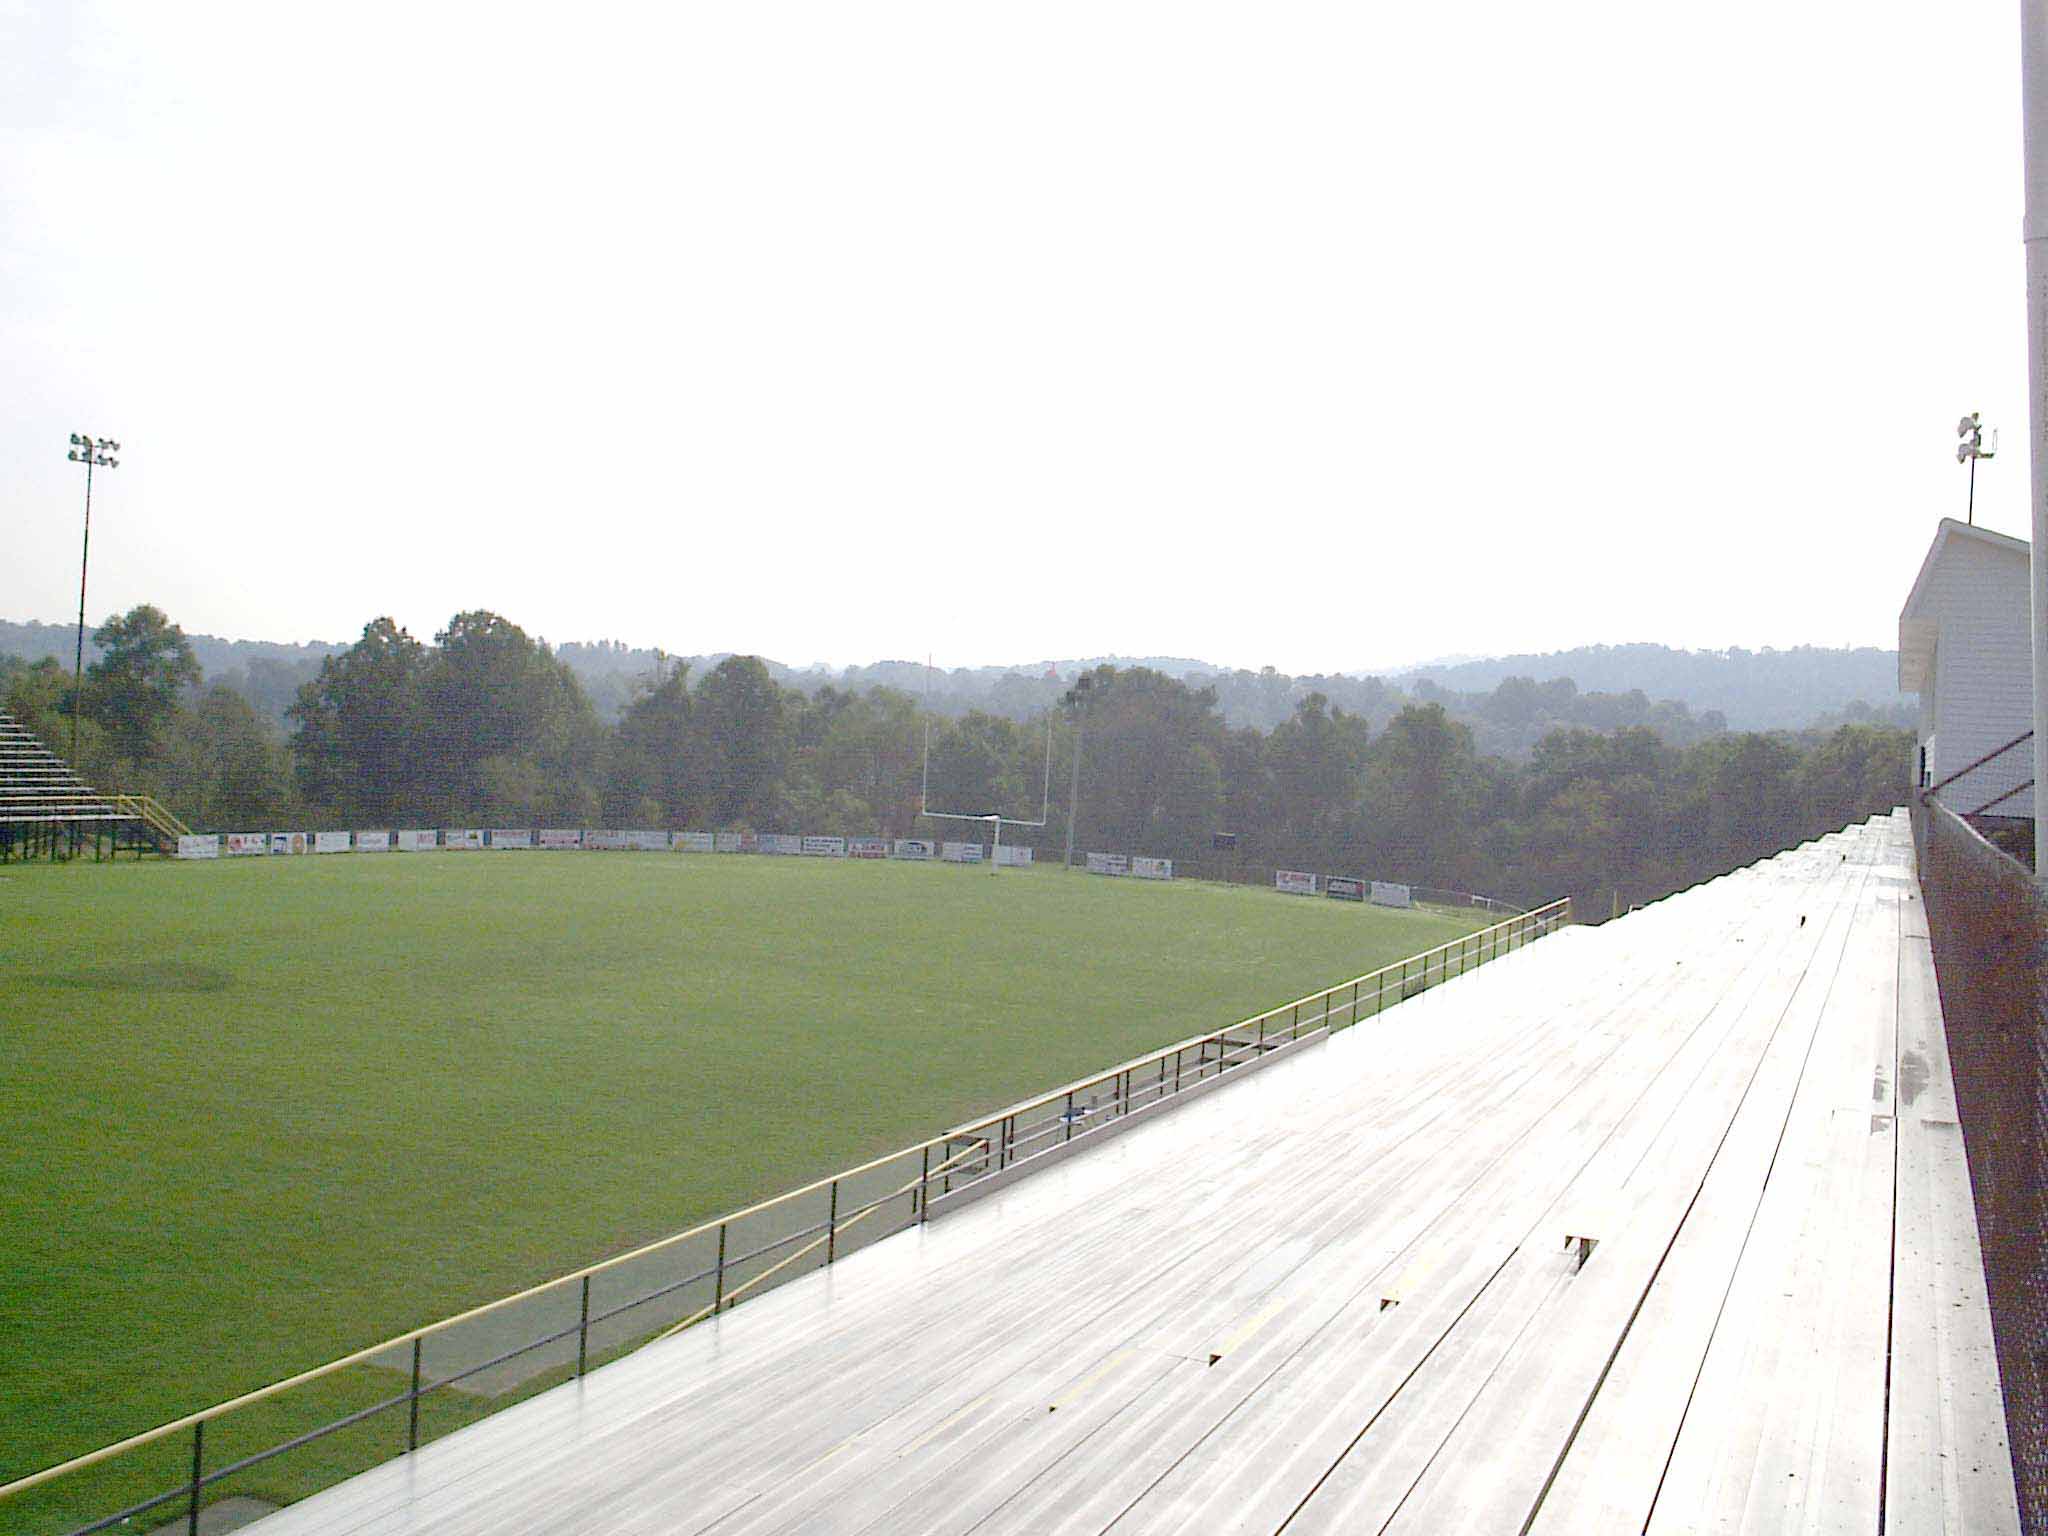 home side seats and pressbox